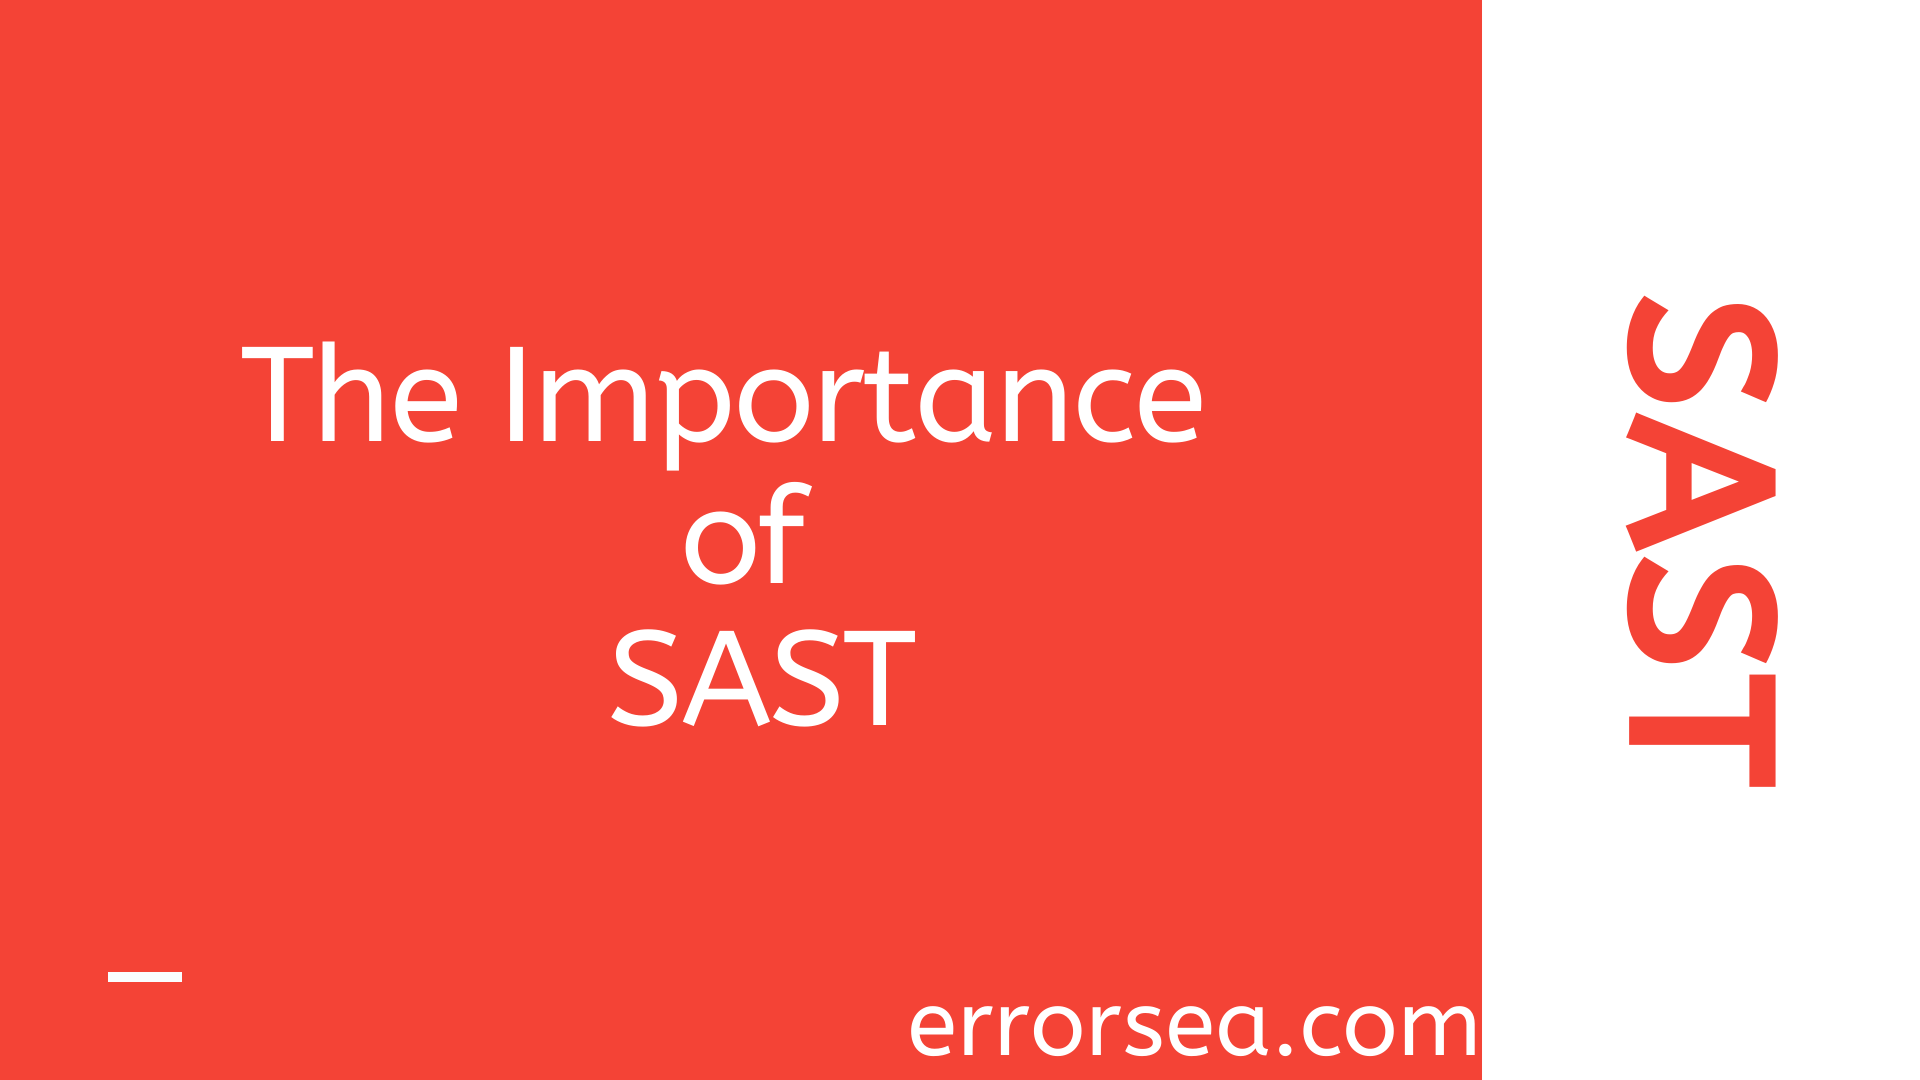 The Importance of SAST